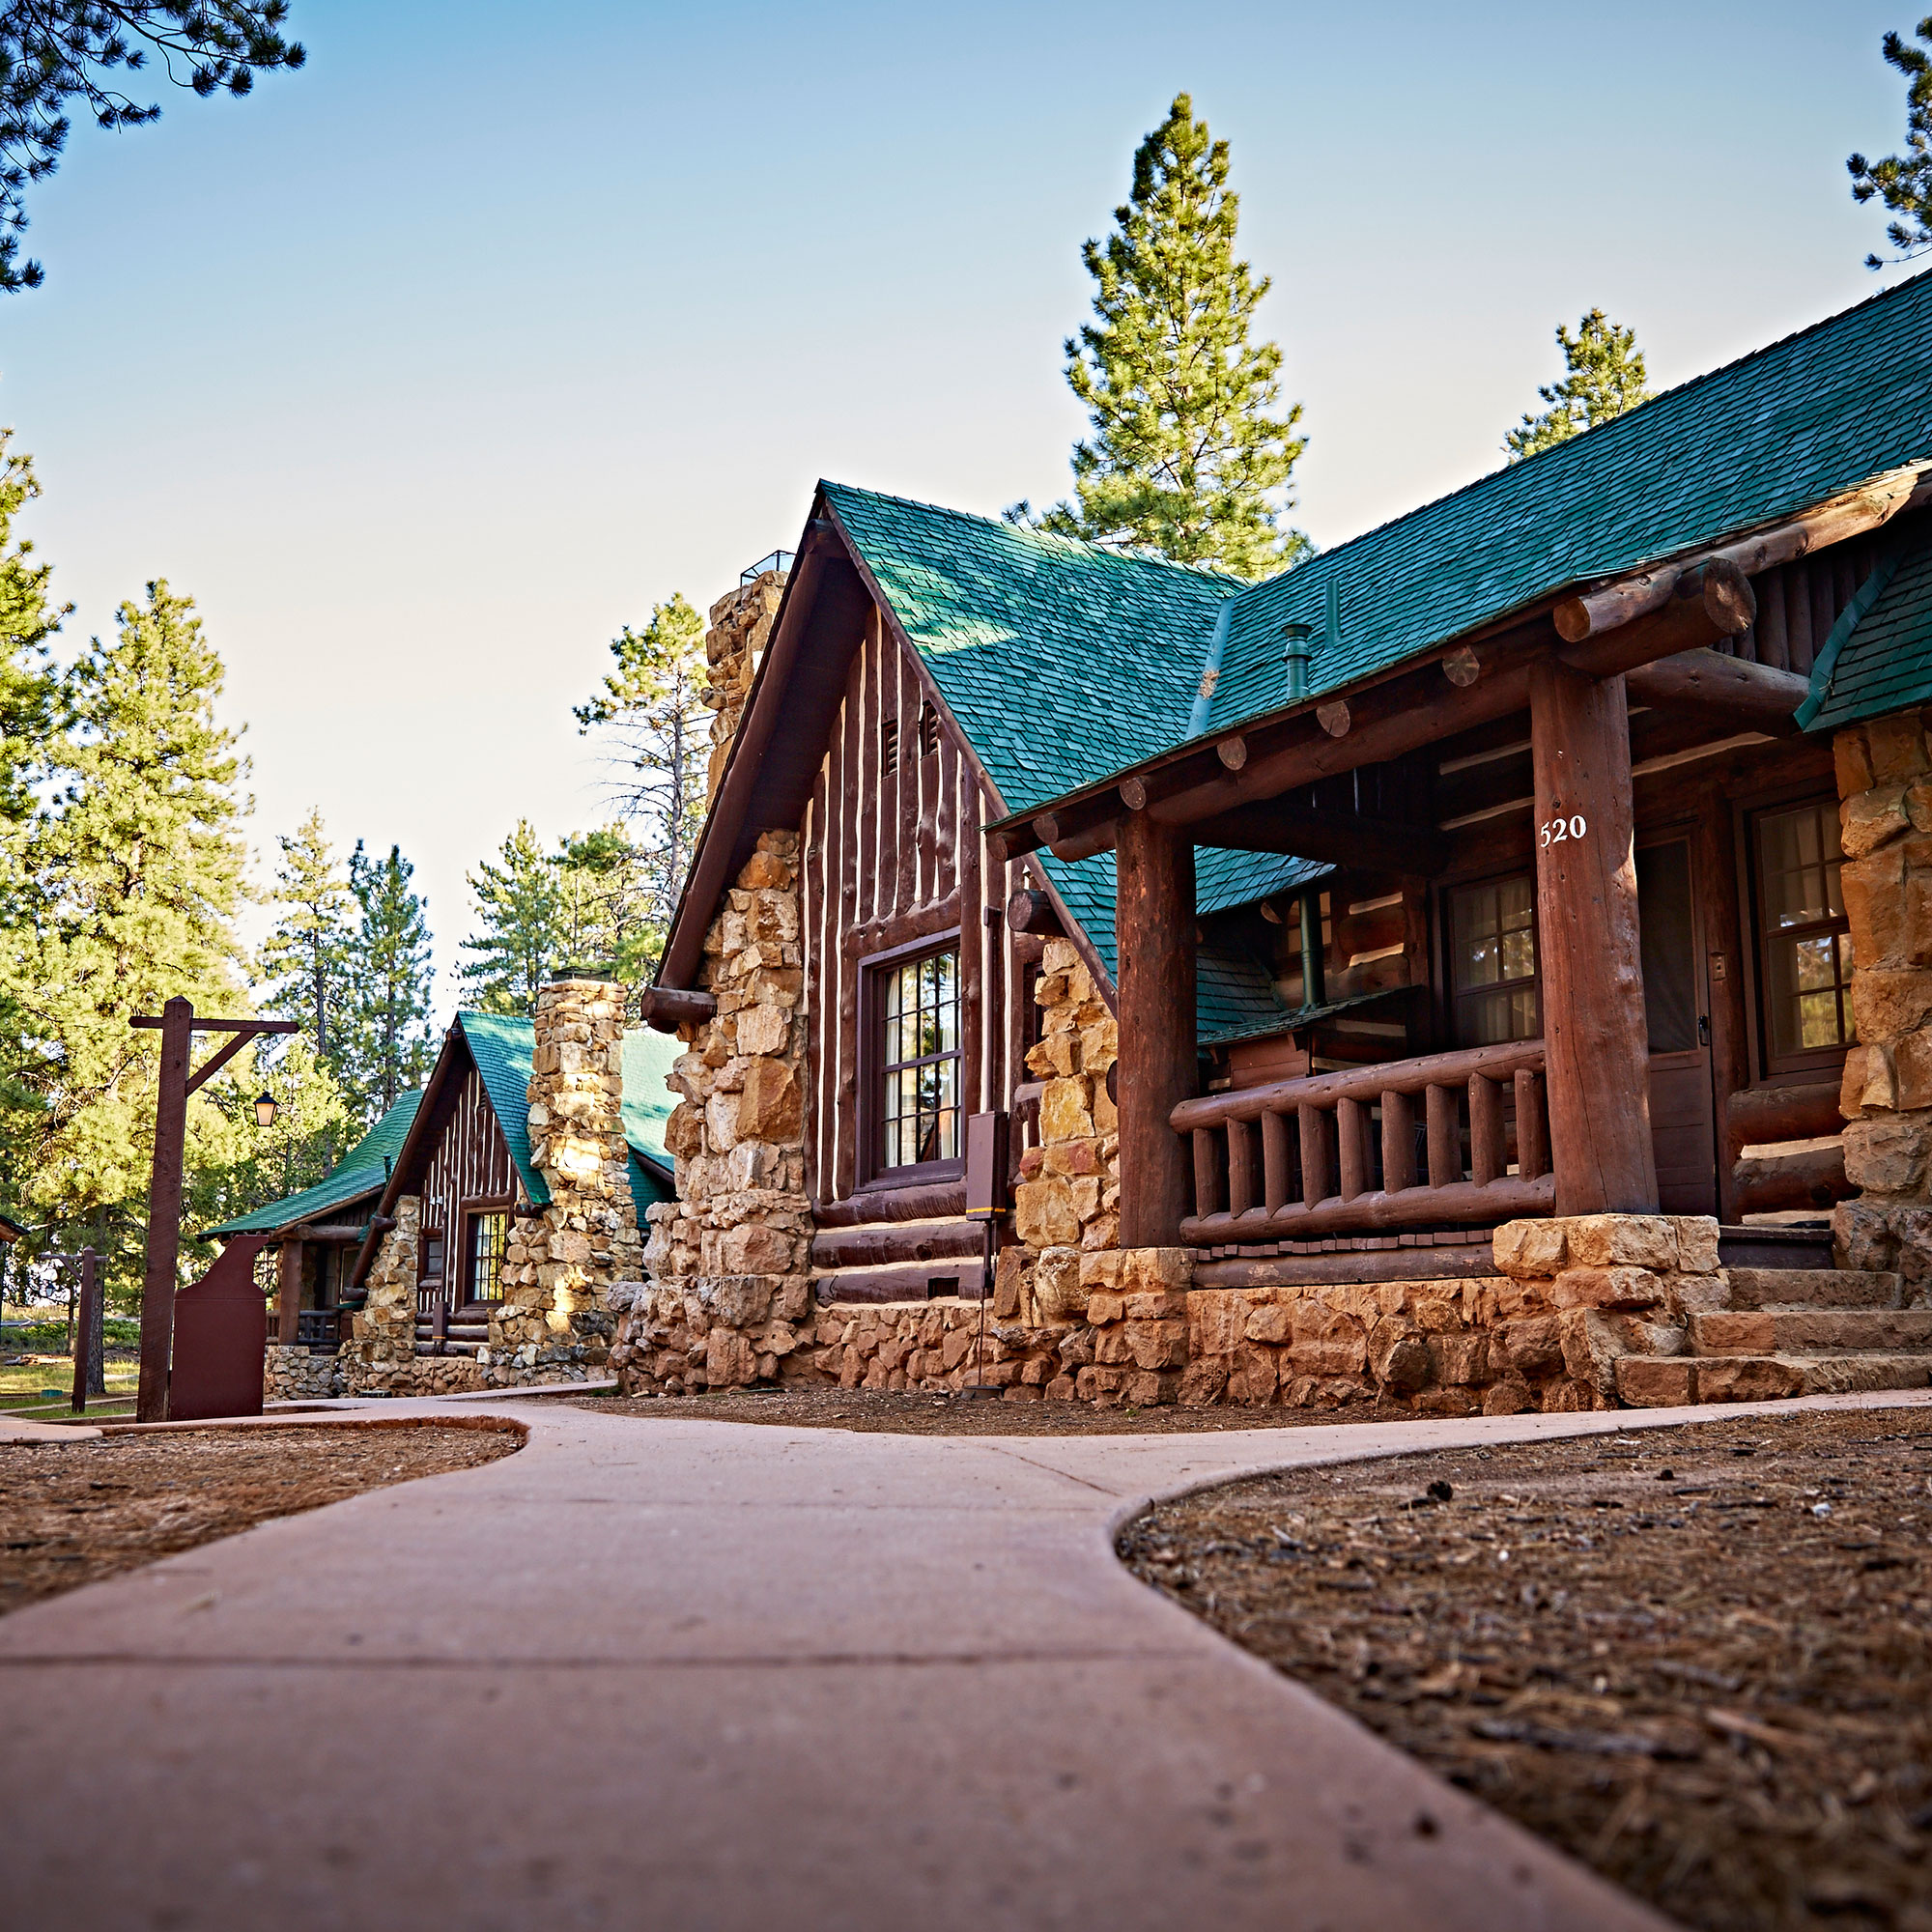 Lodging, Dining, and Camping